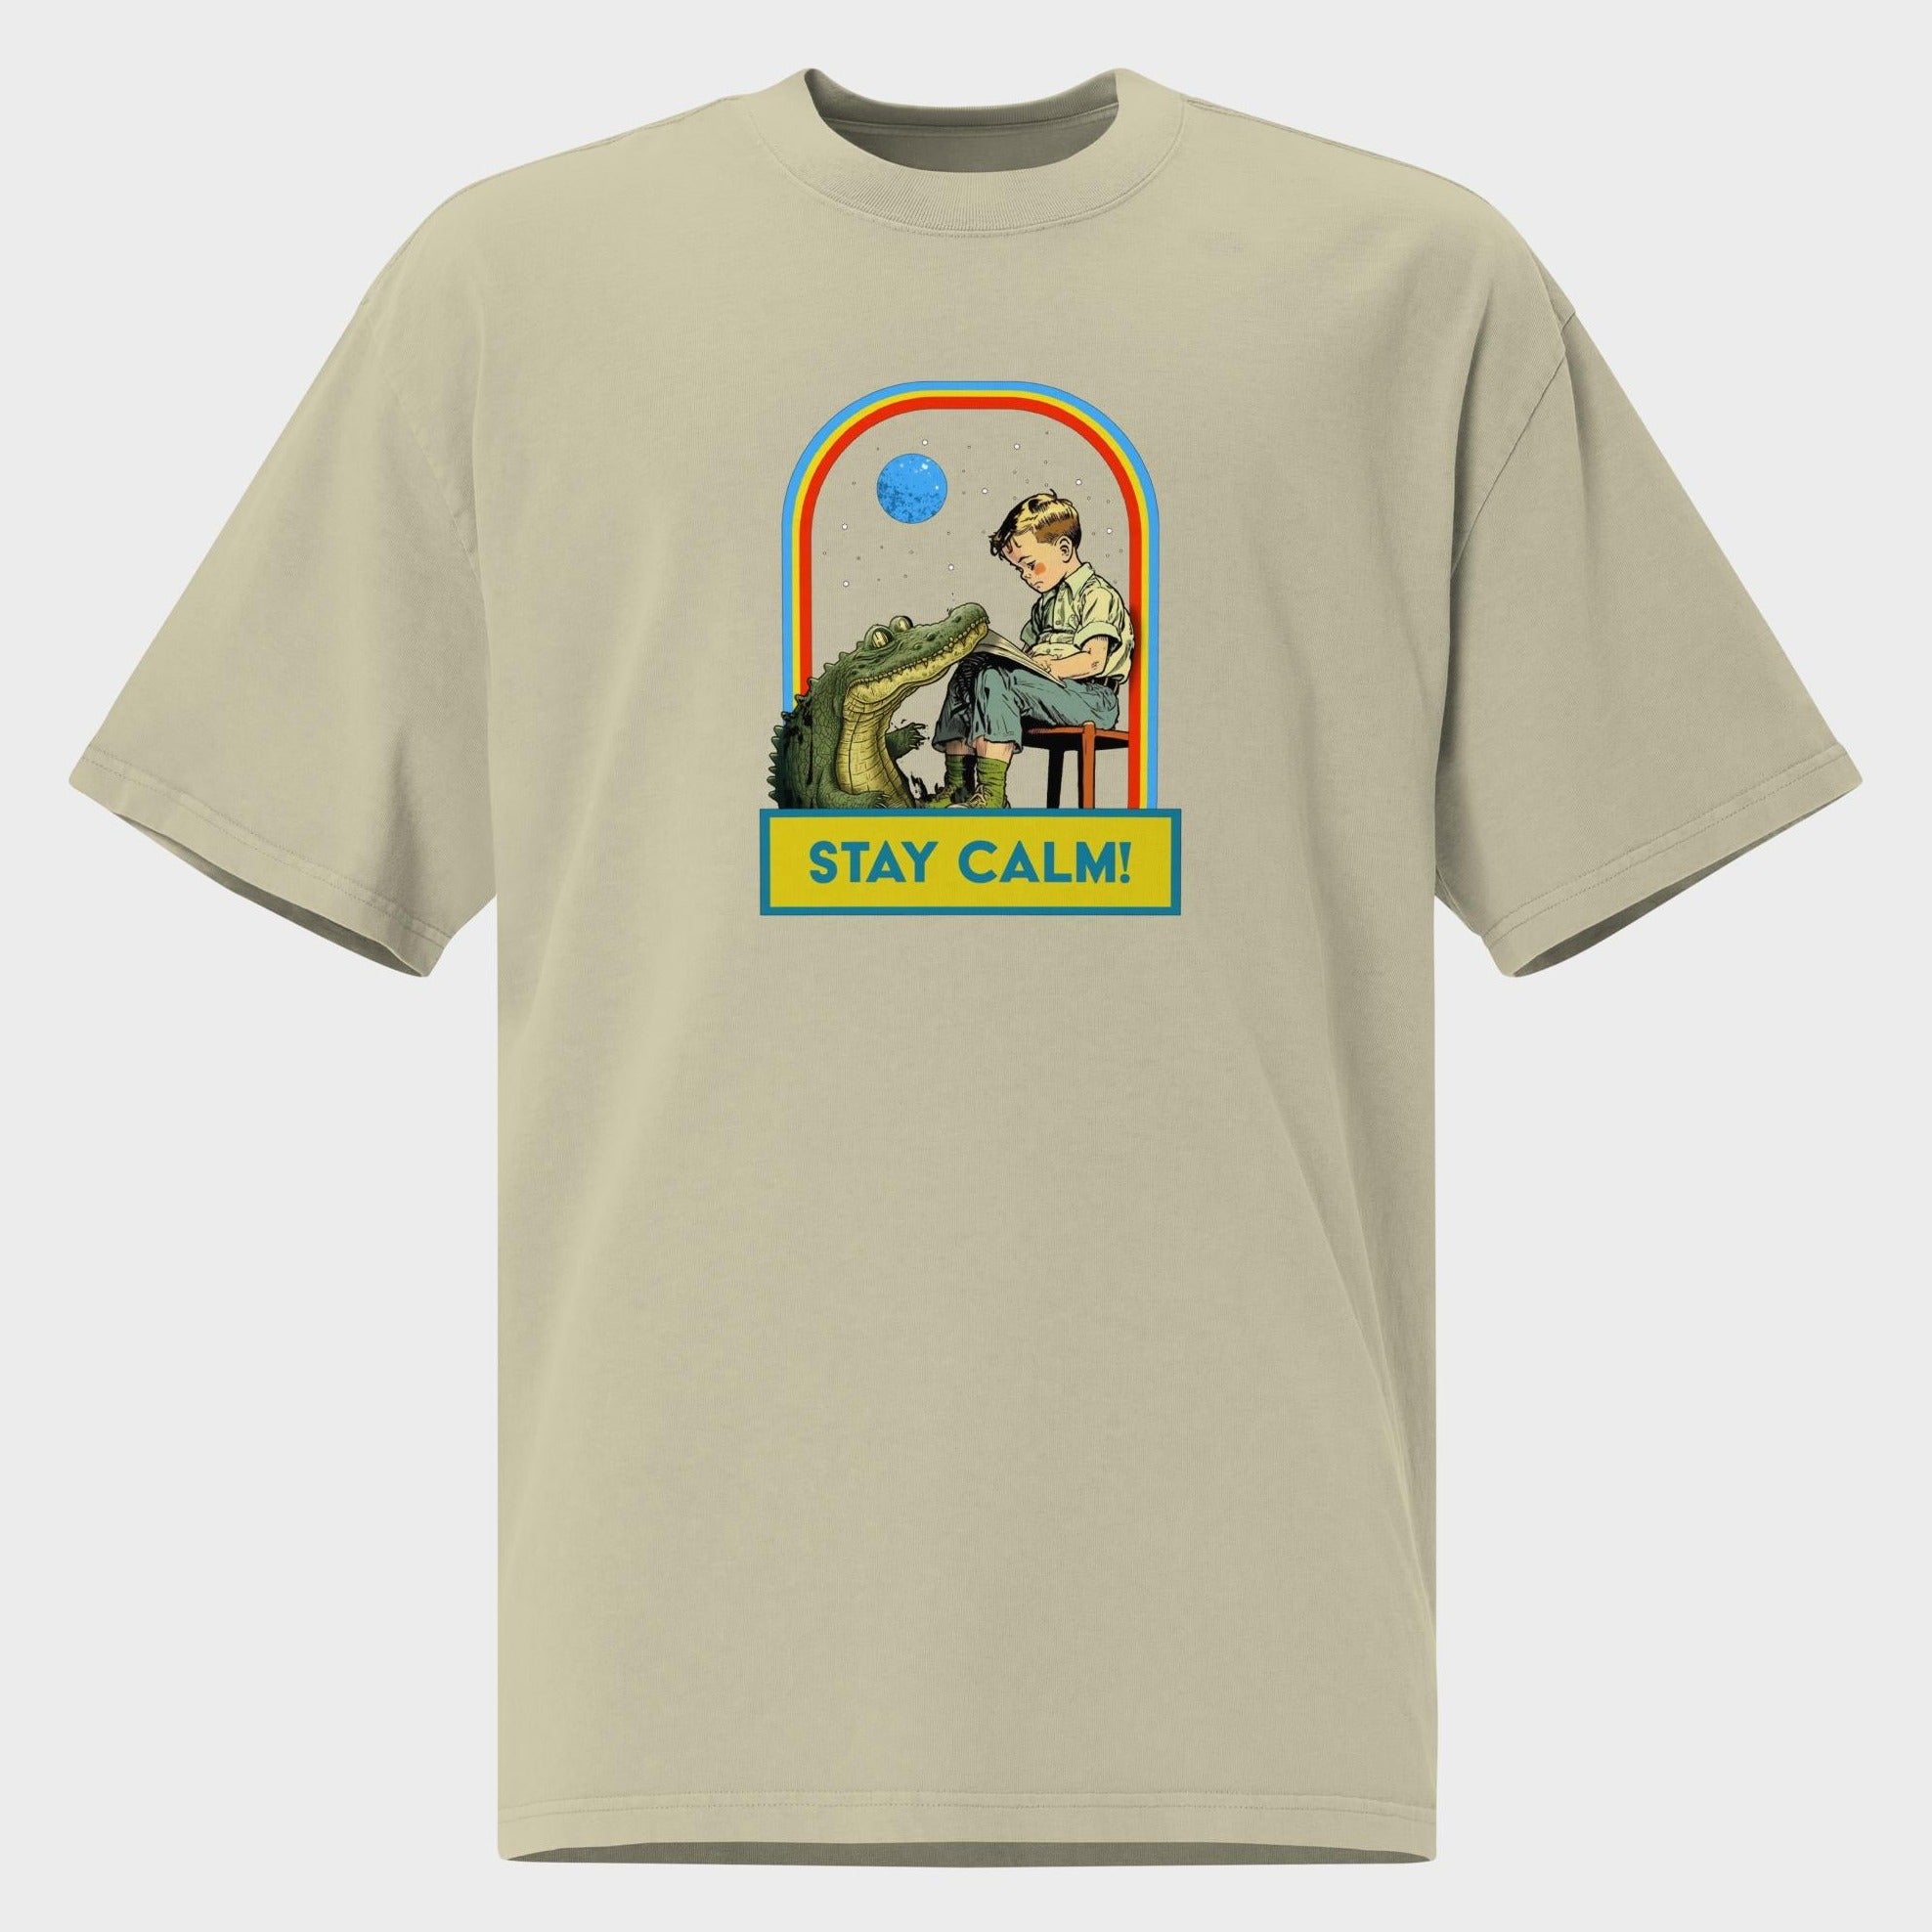 Stay Calm! - Oversized T-Shirt